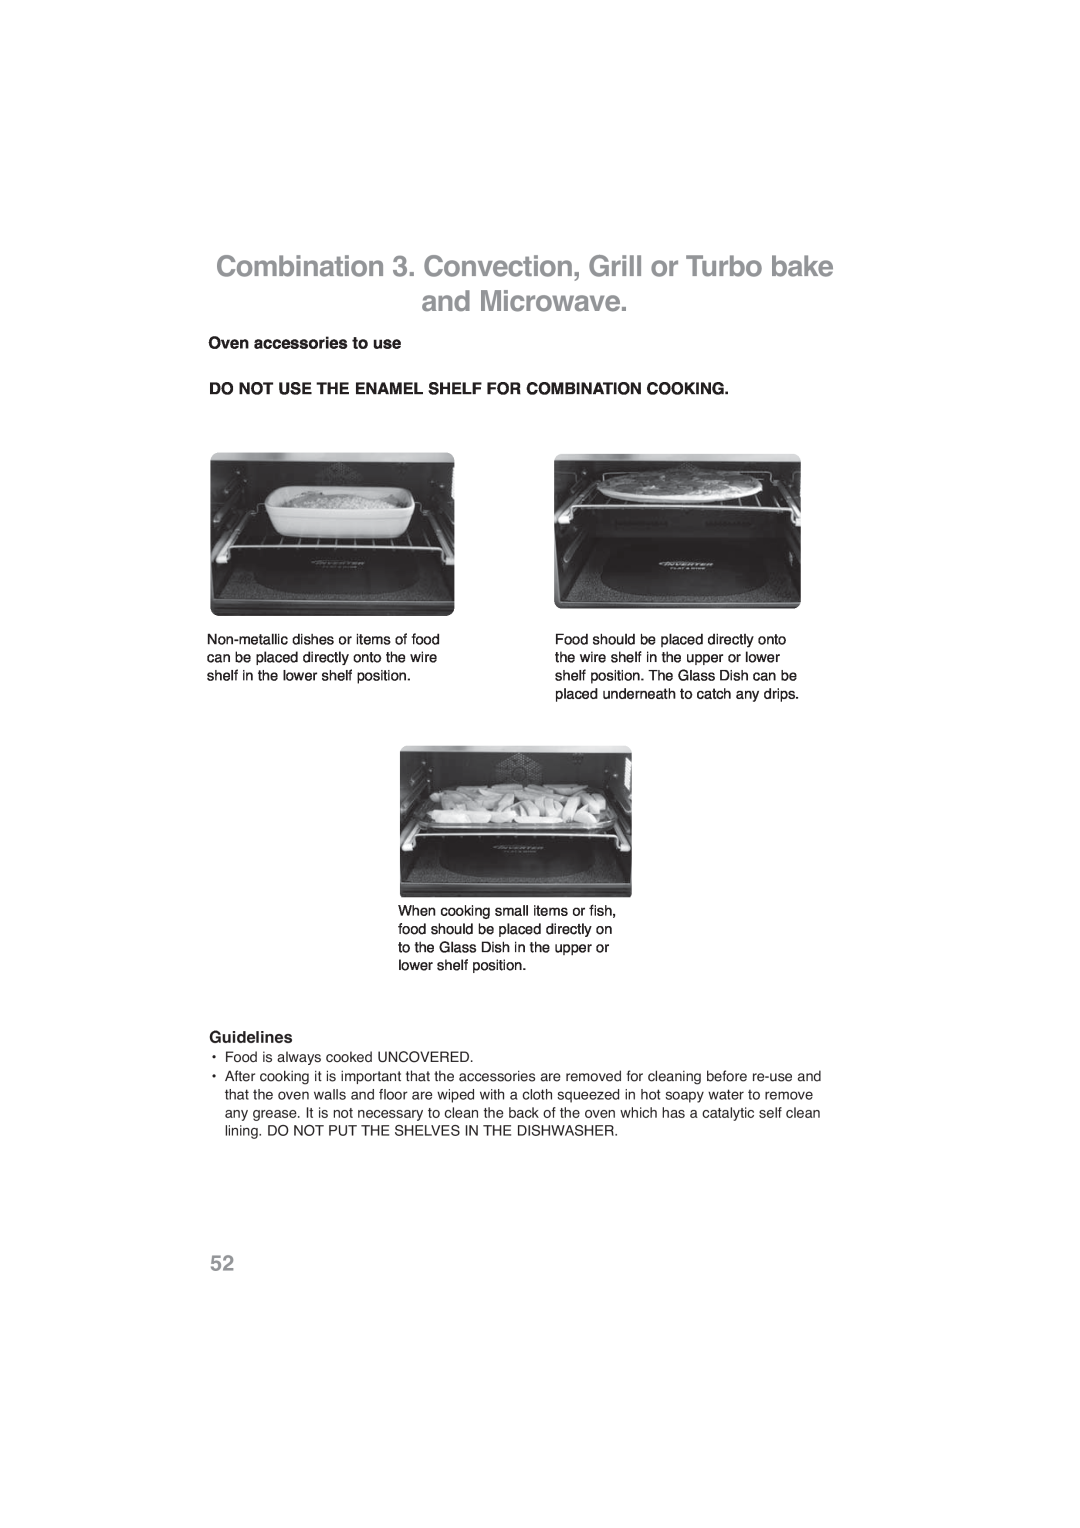 Panasonic NN-CF768M Combination 3. Convection, Grill or Turbo bake, and Microwave, Oven accessories to use, Guidelines 